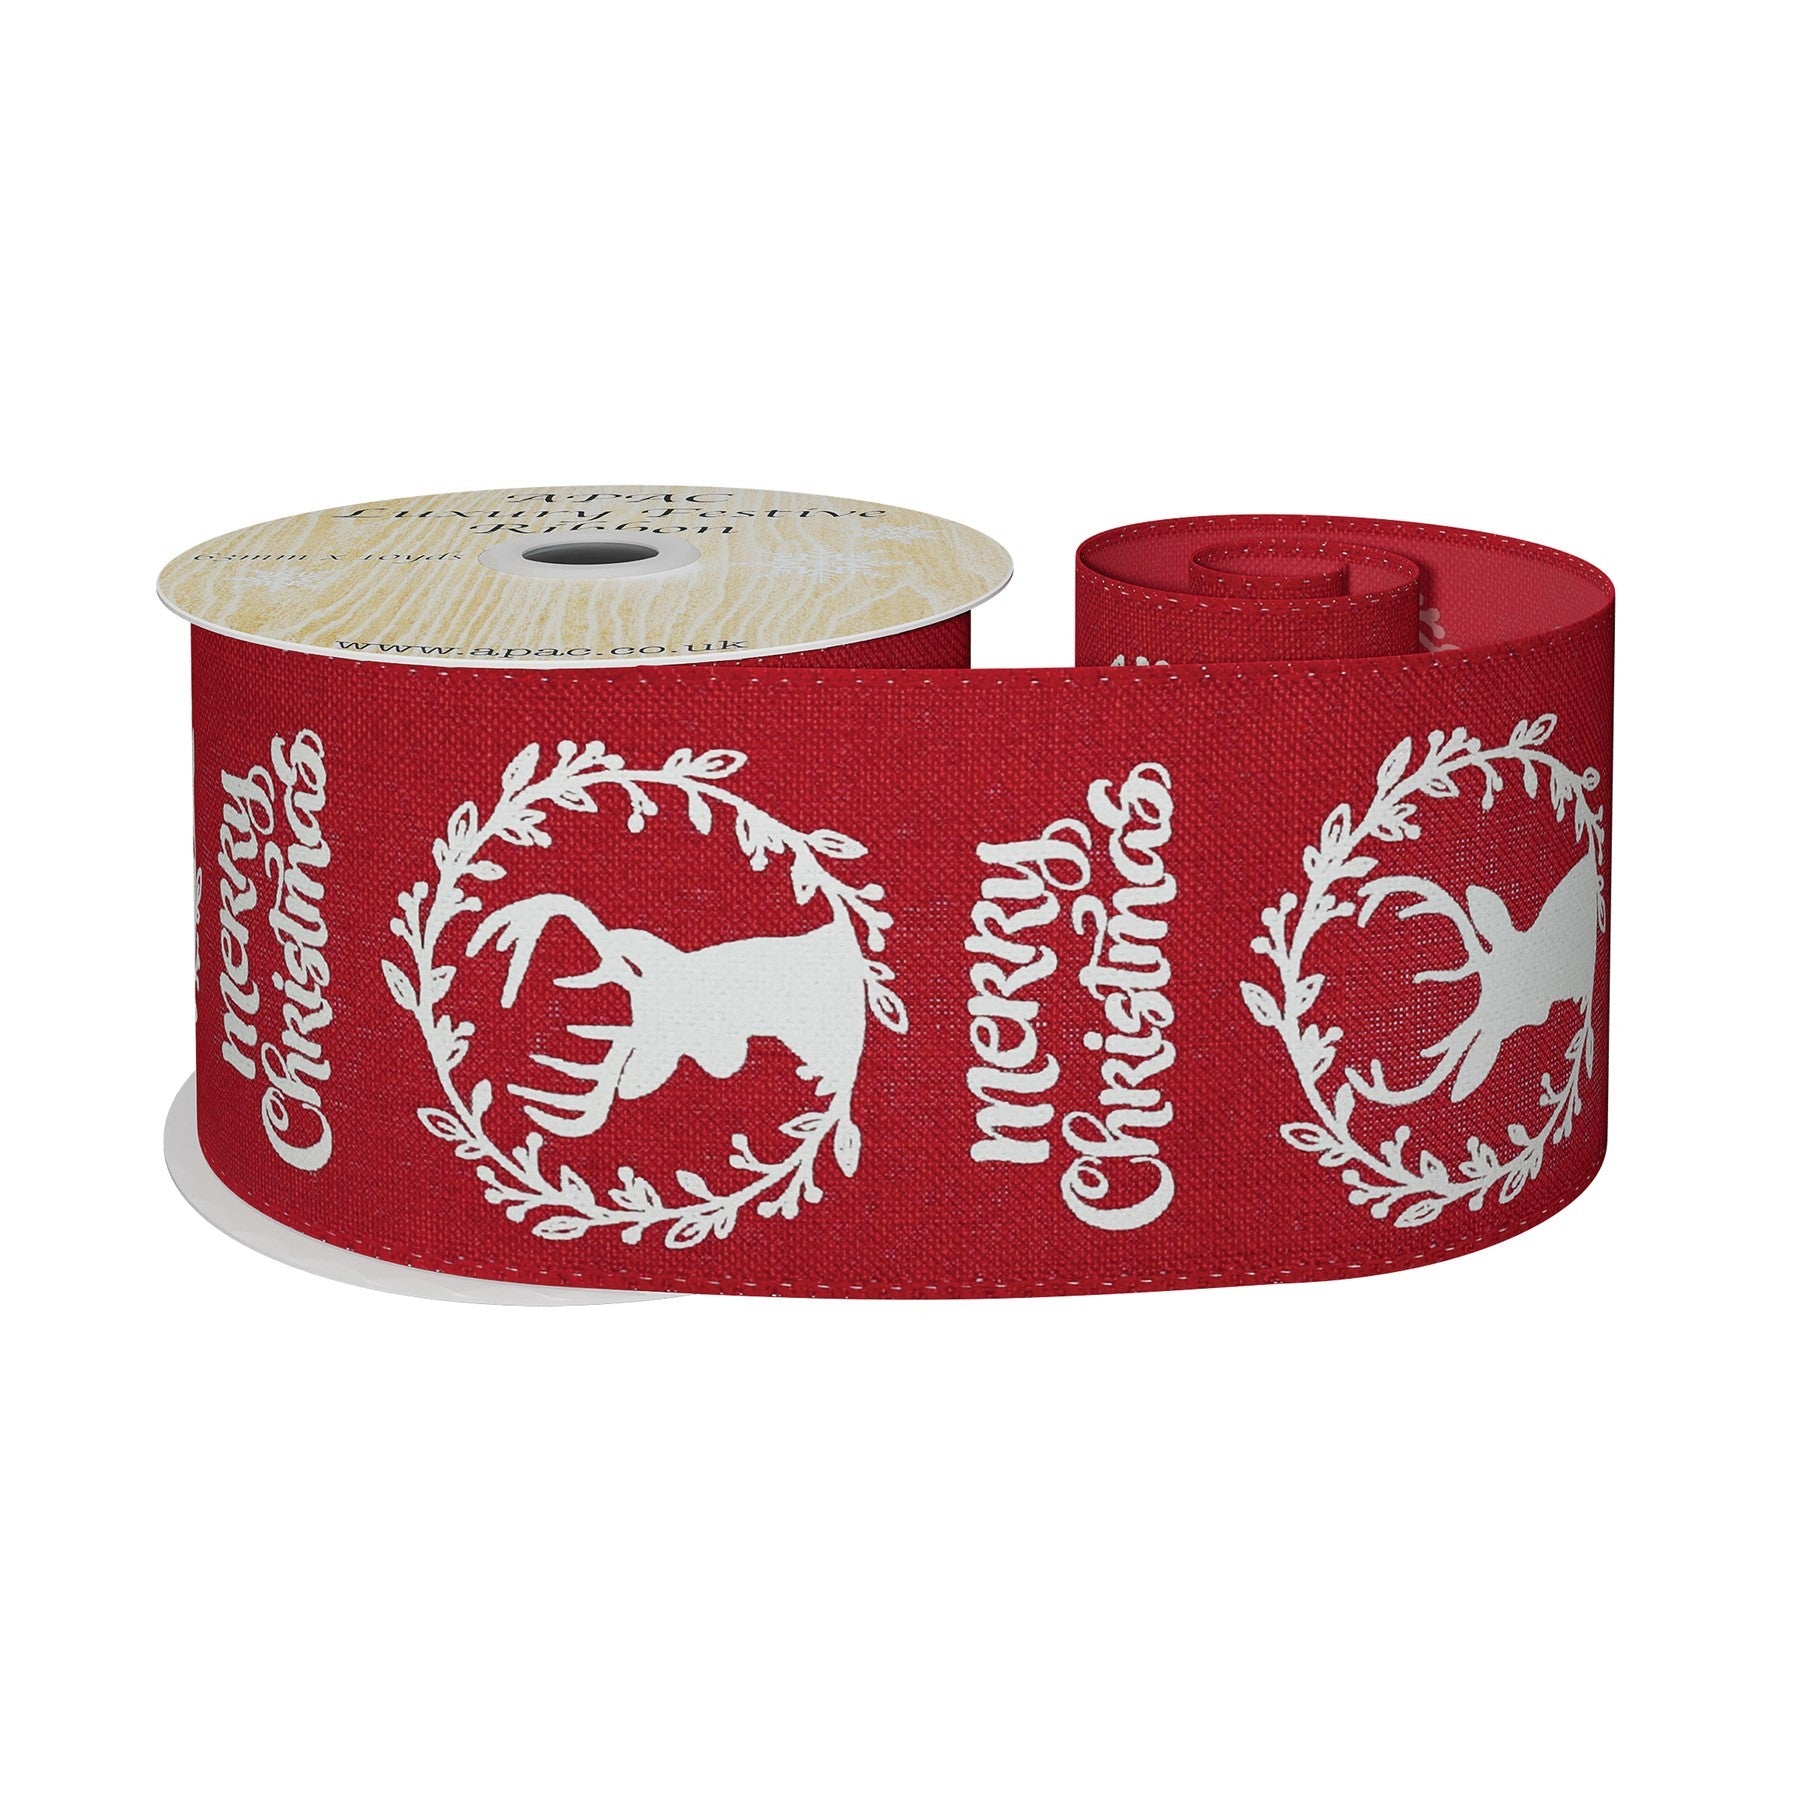 View Red with White Wreath Merry Christmas Ribbon 63mm x 10yds information